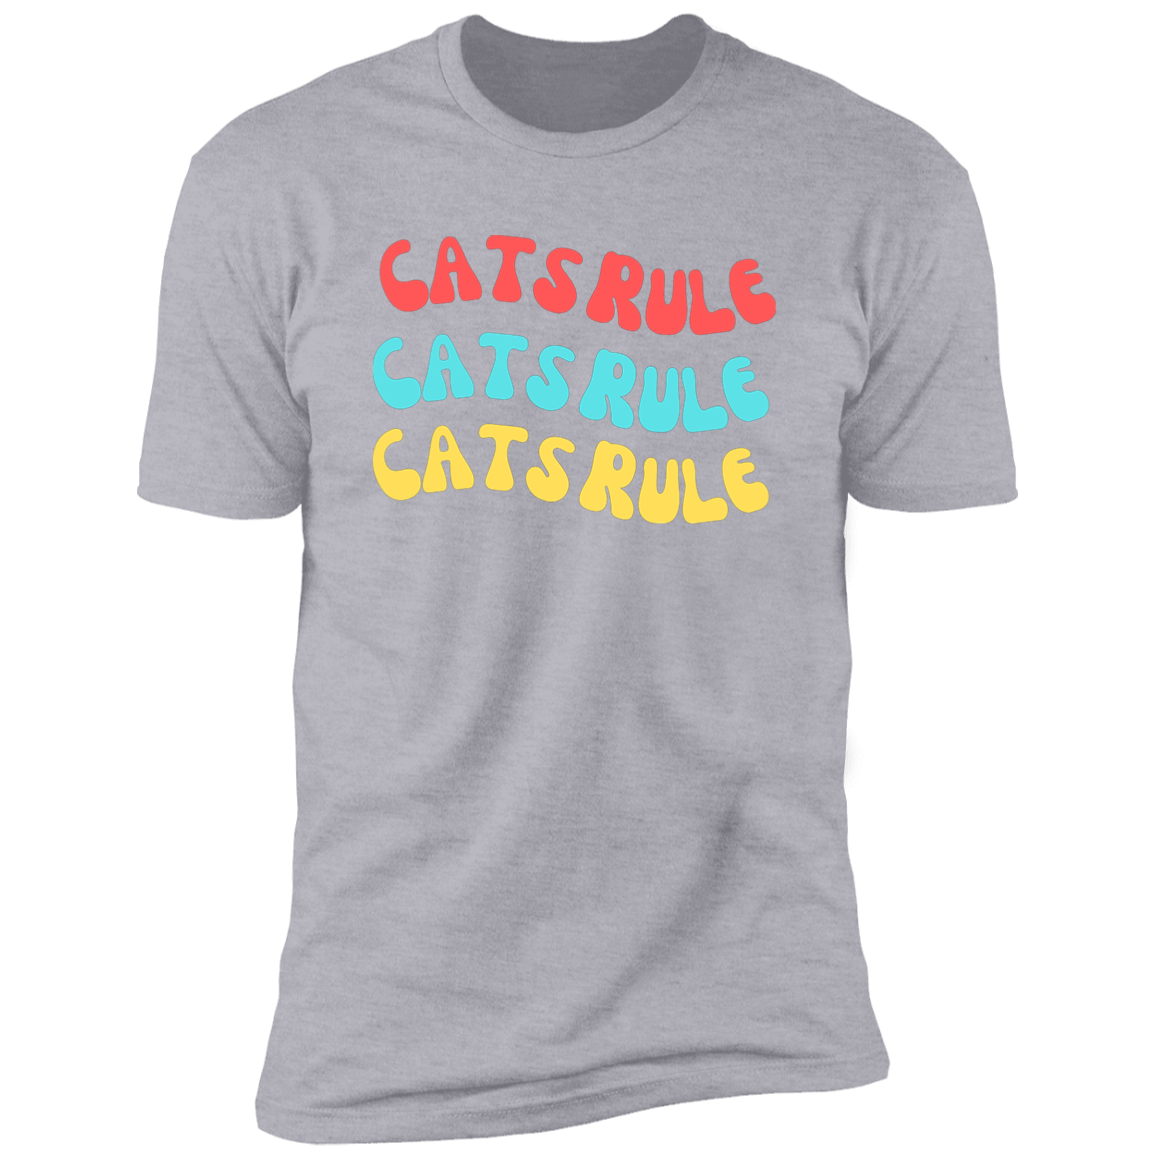 Cats Rule T-shirt, Cat Shirt for humans, in light heather gray